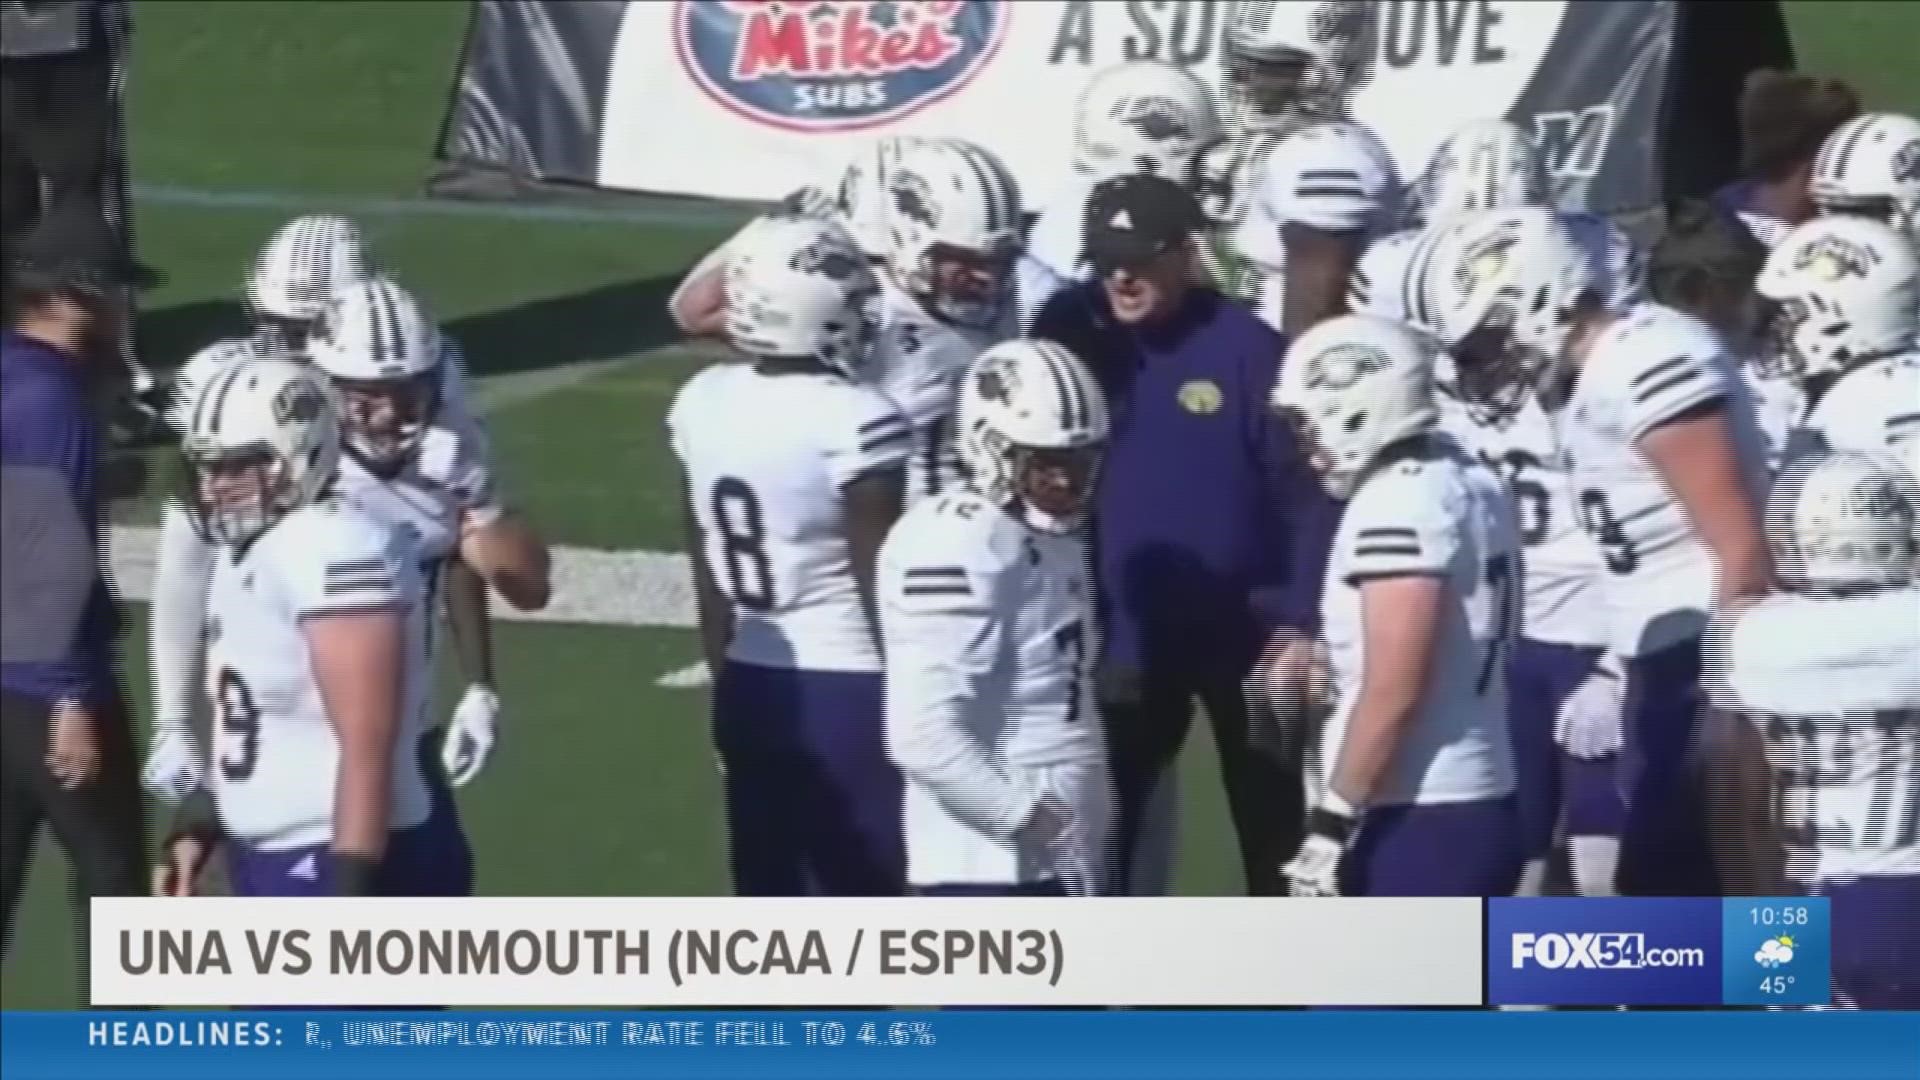 Tony Muskett threw four touchdown passes, three of them to Lonnie Moore IV, and Monmouth defeated UNA 45-33.